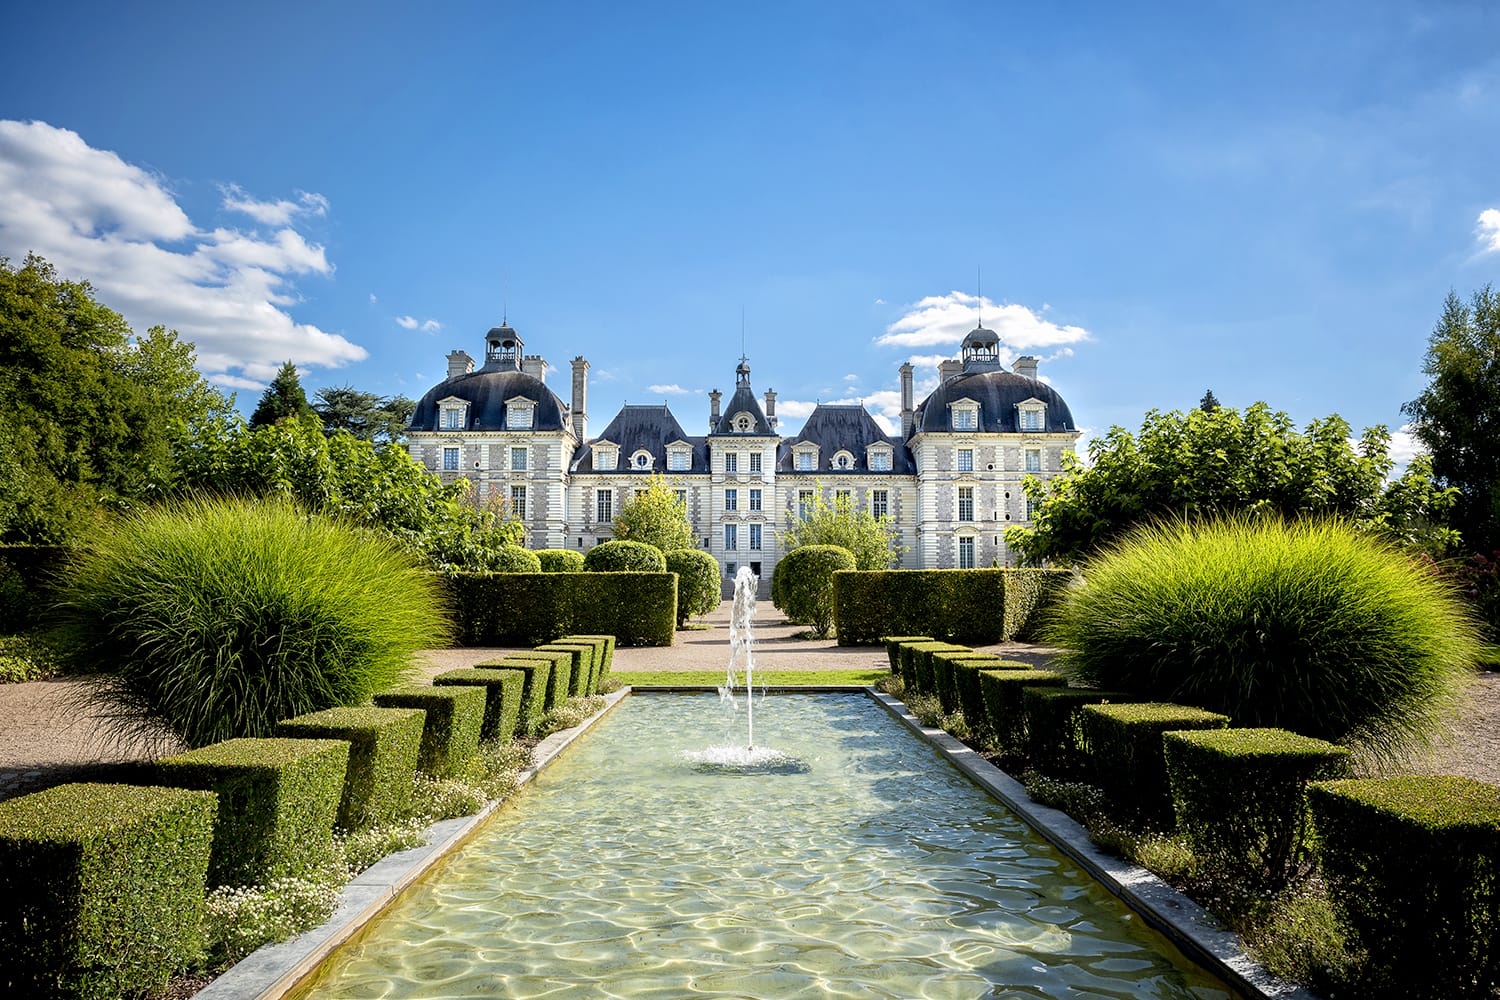 Chateau de Cheverny in the Loire Valley, France